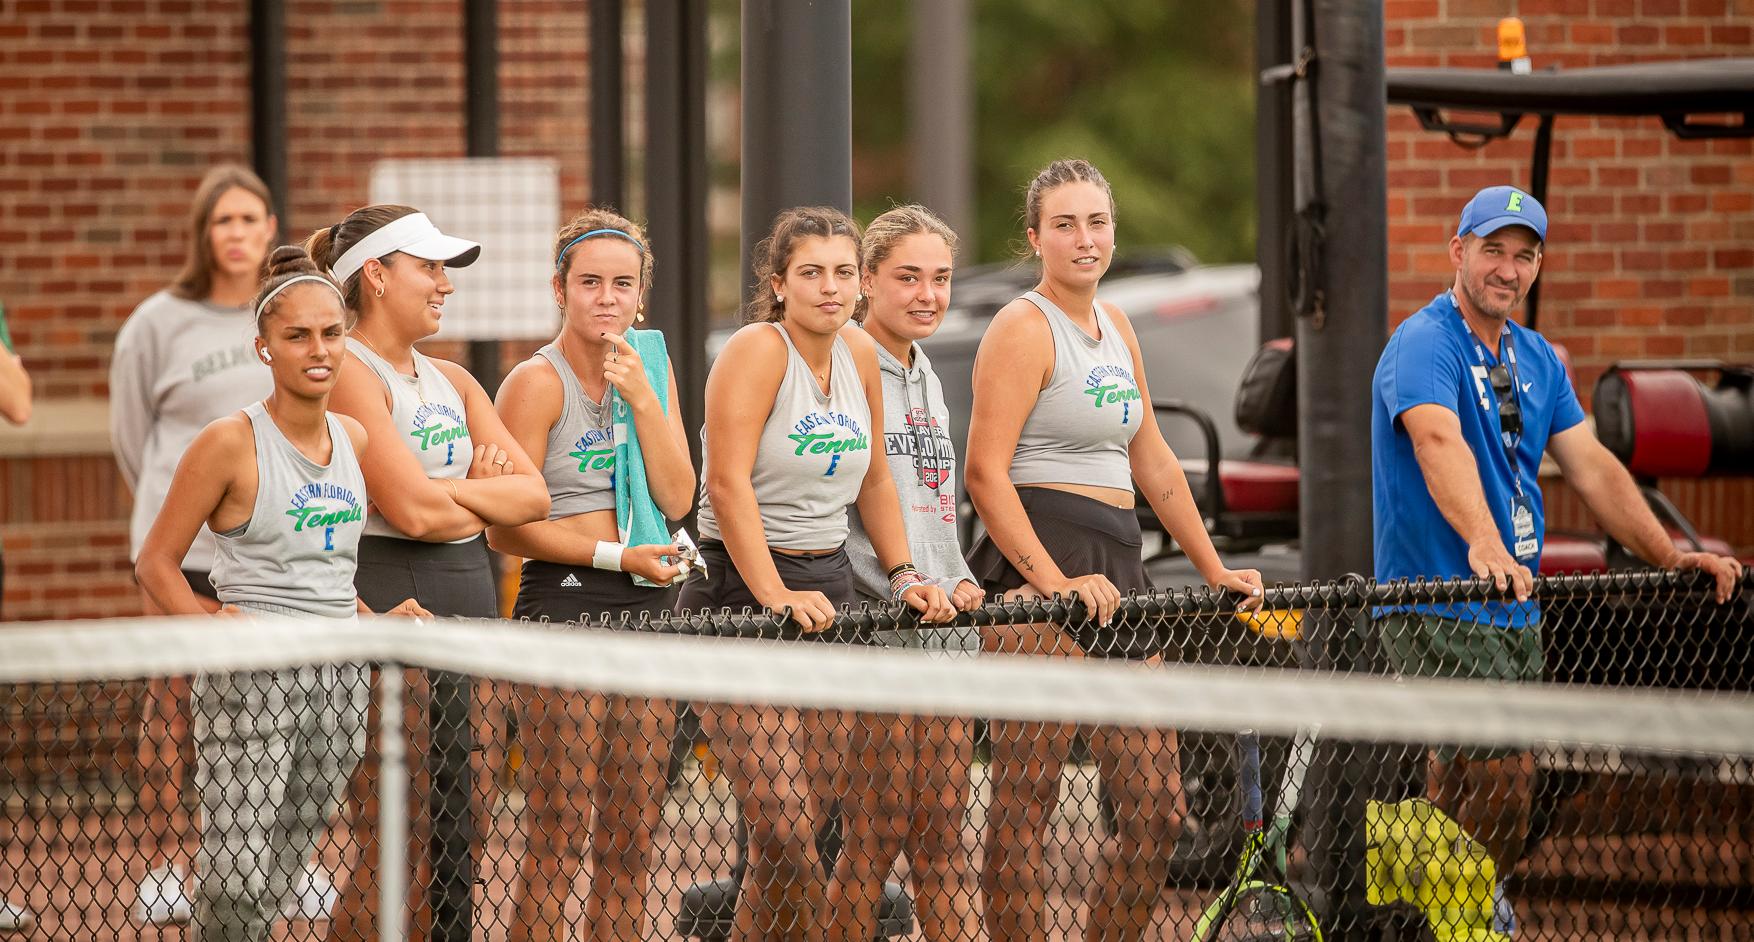 Women's tennis team has good day at national tournament